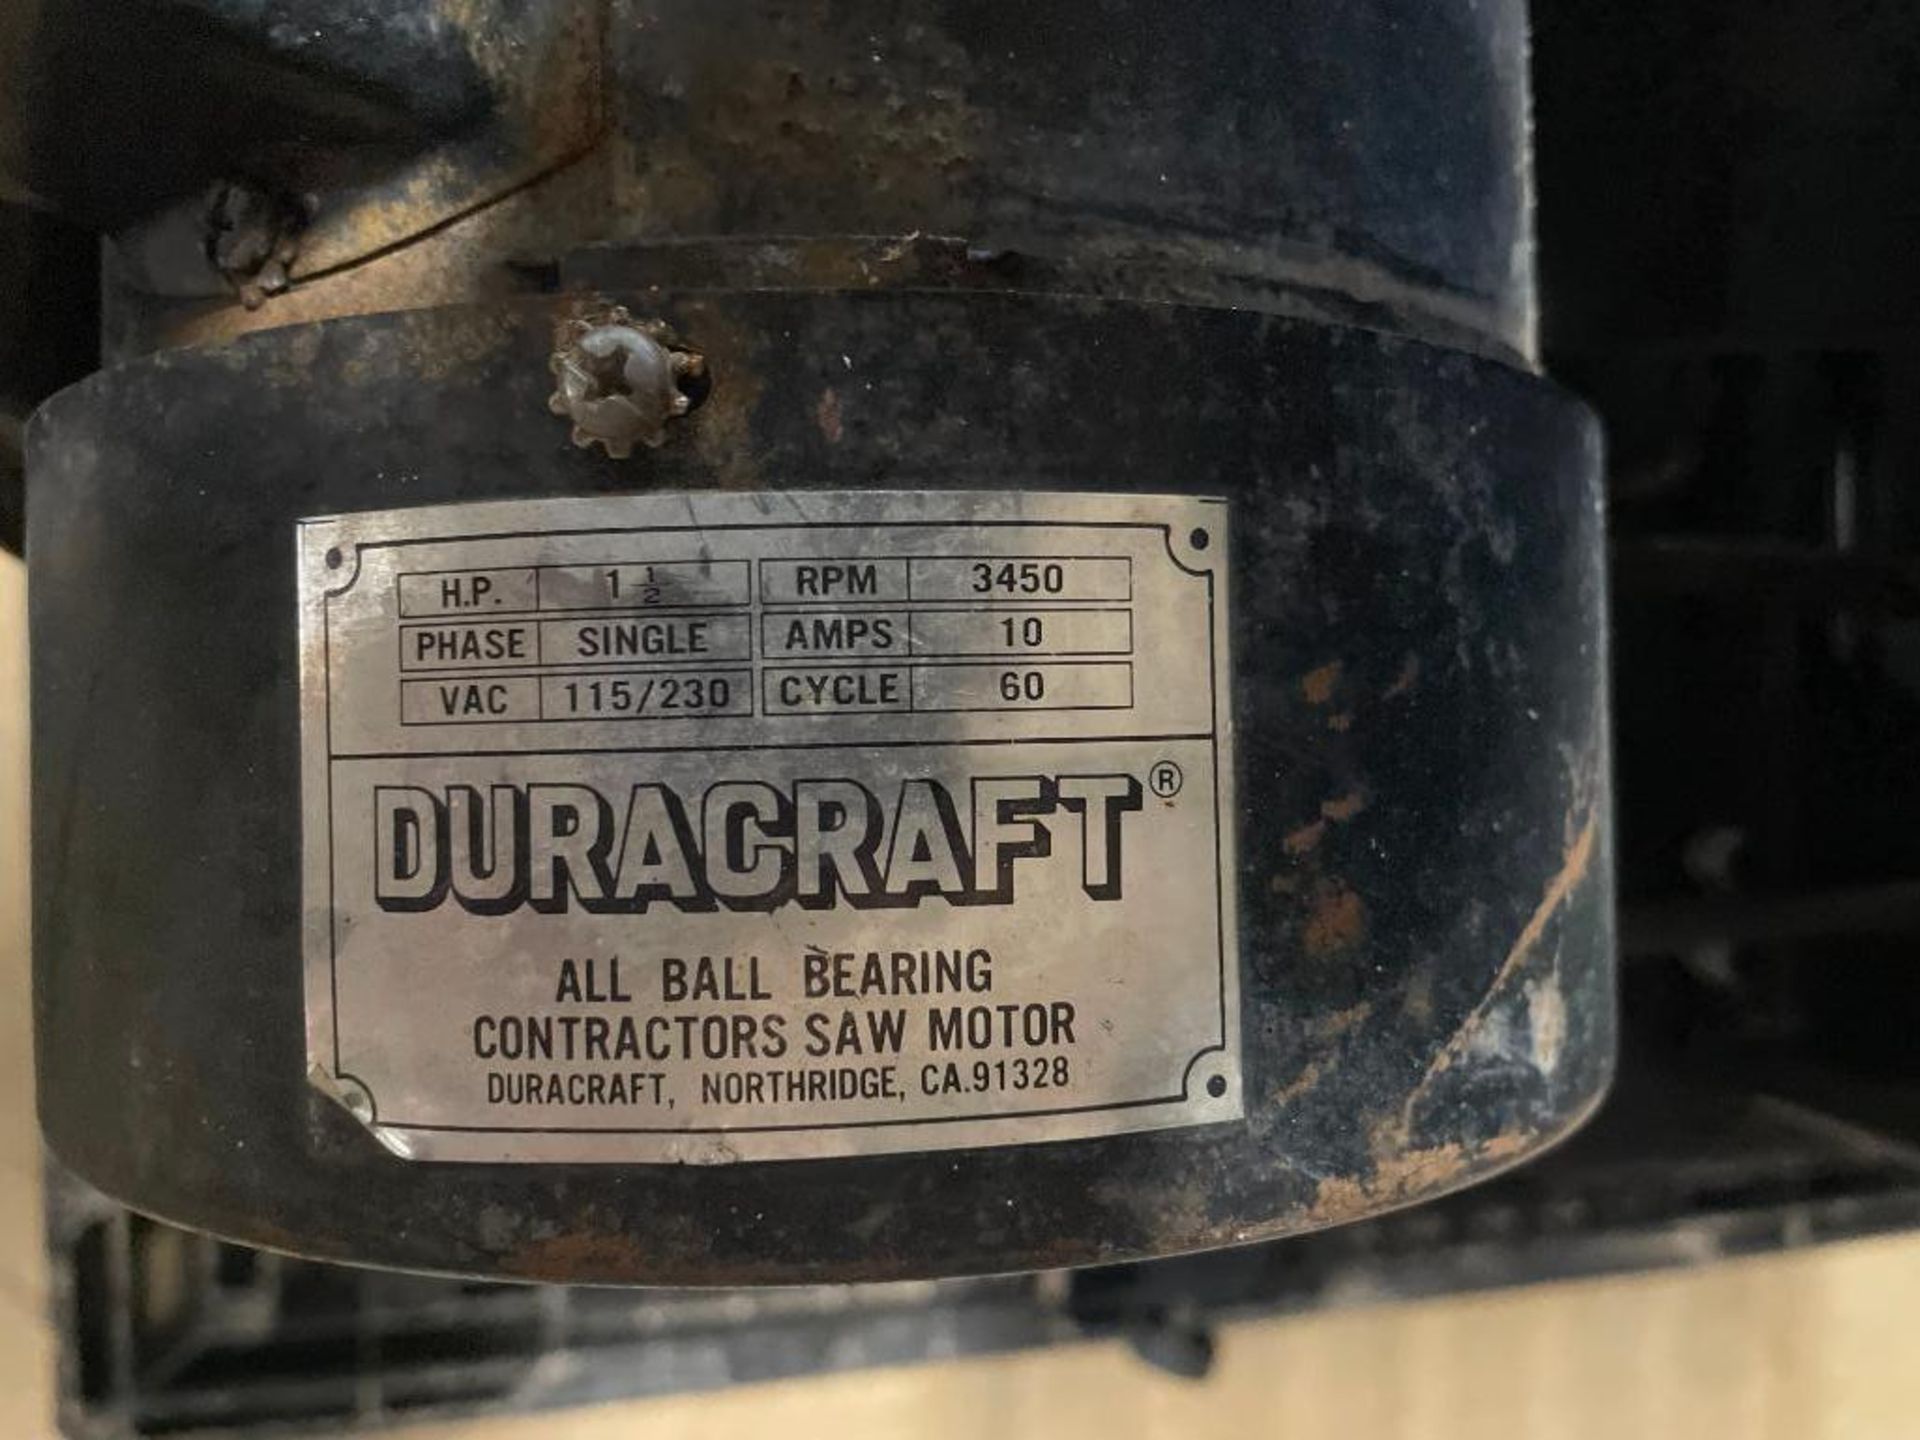 Duracraft 10" Contractors Saw, Model TSC 10, Serial #3975. Located in Hazelwood, MO - Image 5 of 8